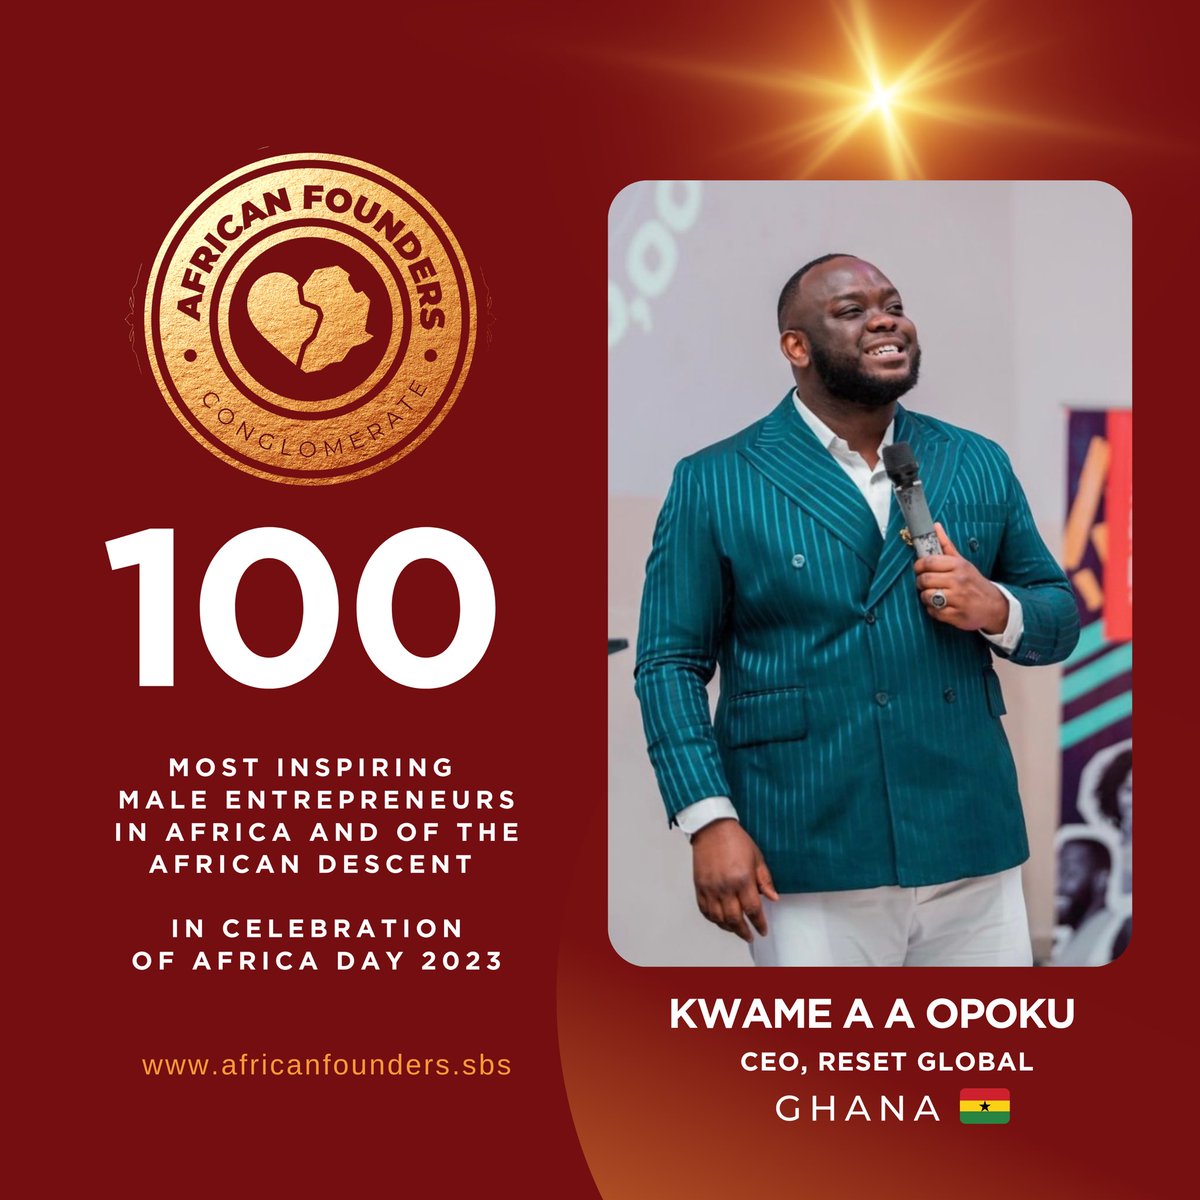 #AFCFeatures | In celebration of AFRICA DAY , we honor #Kwameopoku  for his resilience, achievements and great entrepreneurial spirit.

African Founders Feature.
#100mostinspiringmaleentrepreneurs
.
AFRICAN FOUNDERS CONGLOMERATE | Promoting Entrepreneurship & Lifestyle